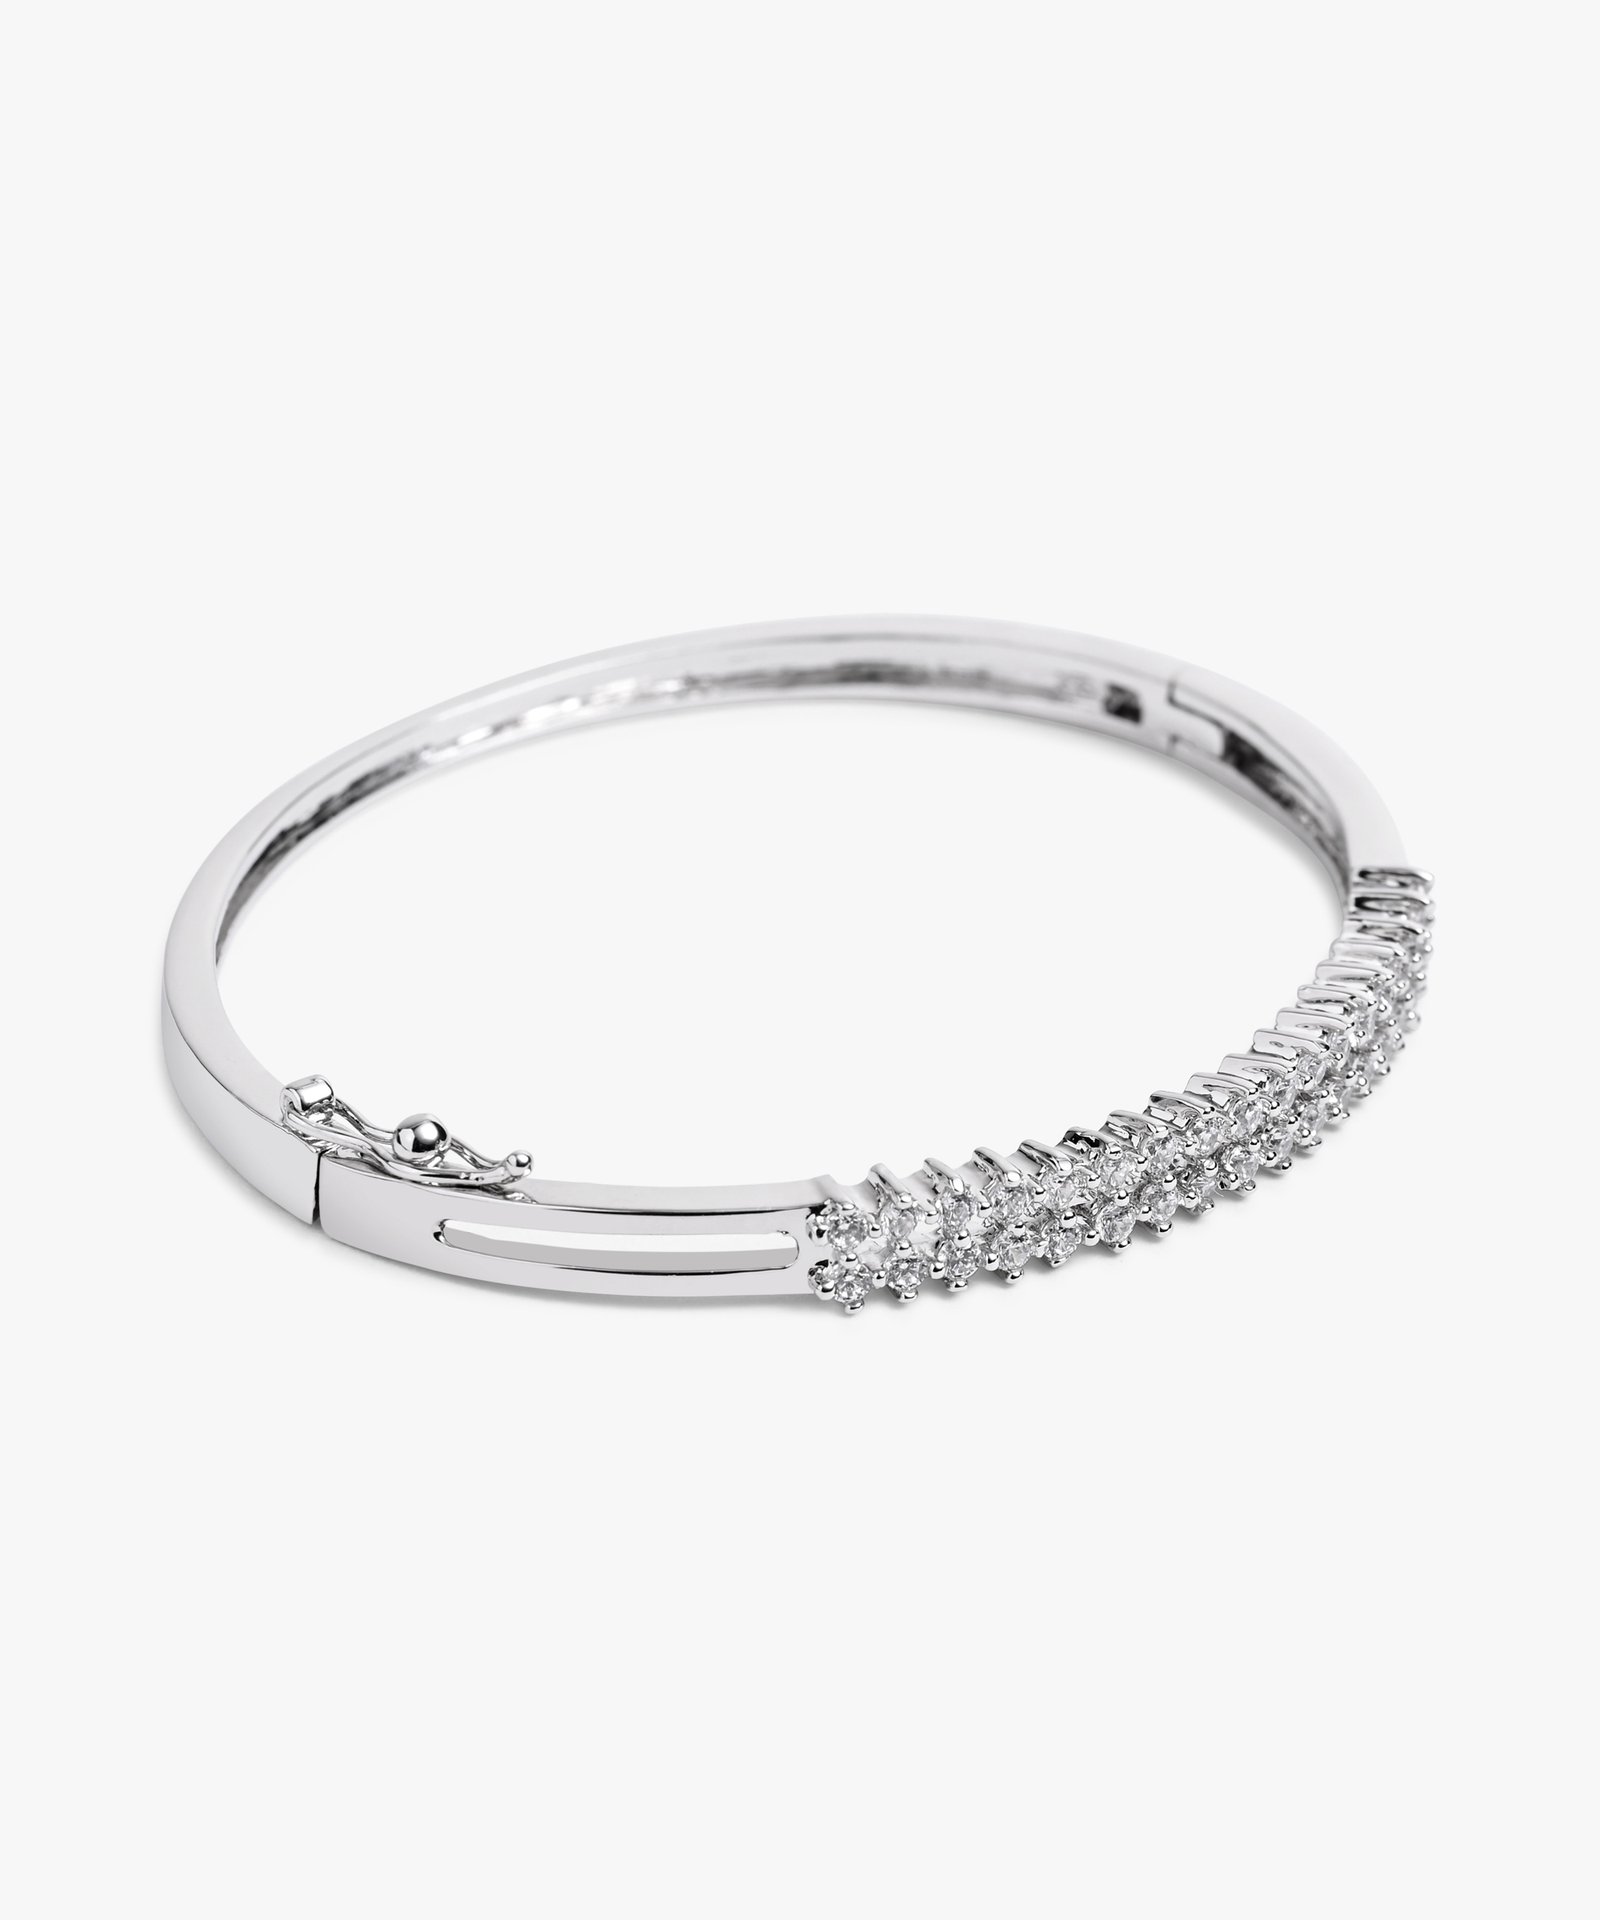 Exquisite Silver Bracelet by March Jewellery